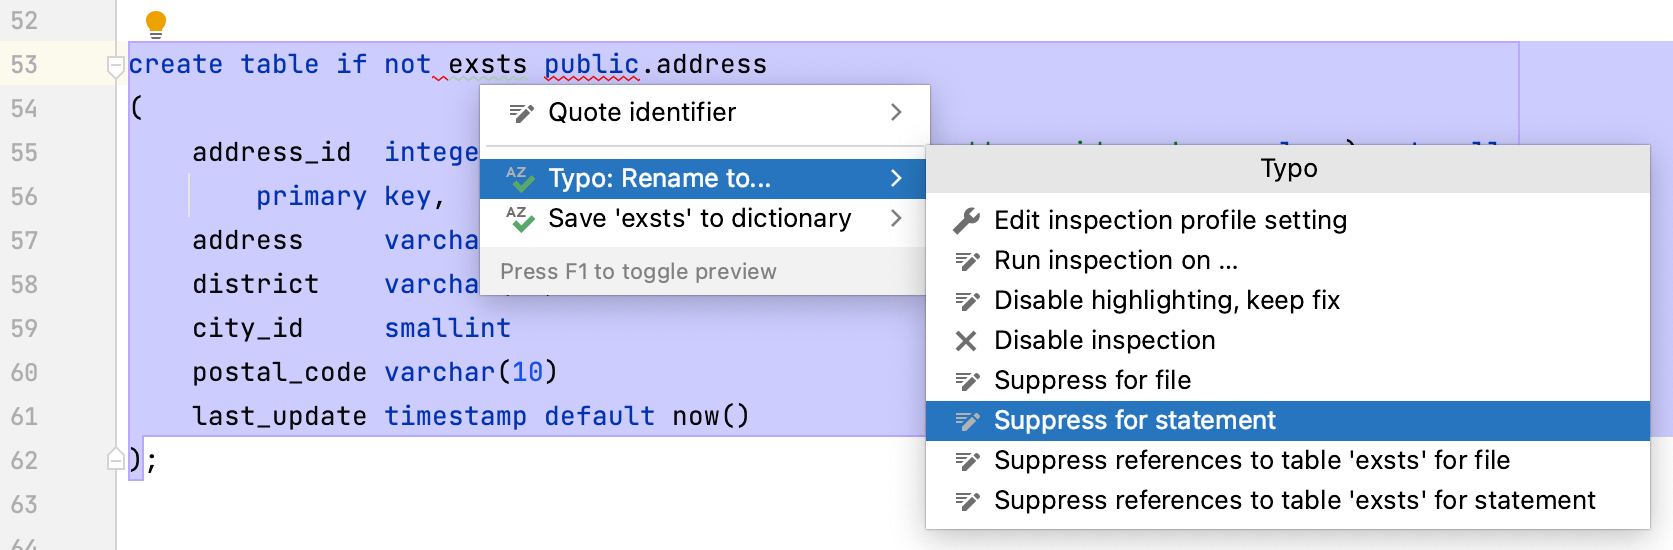 How to suppress the Typo inspection